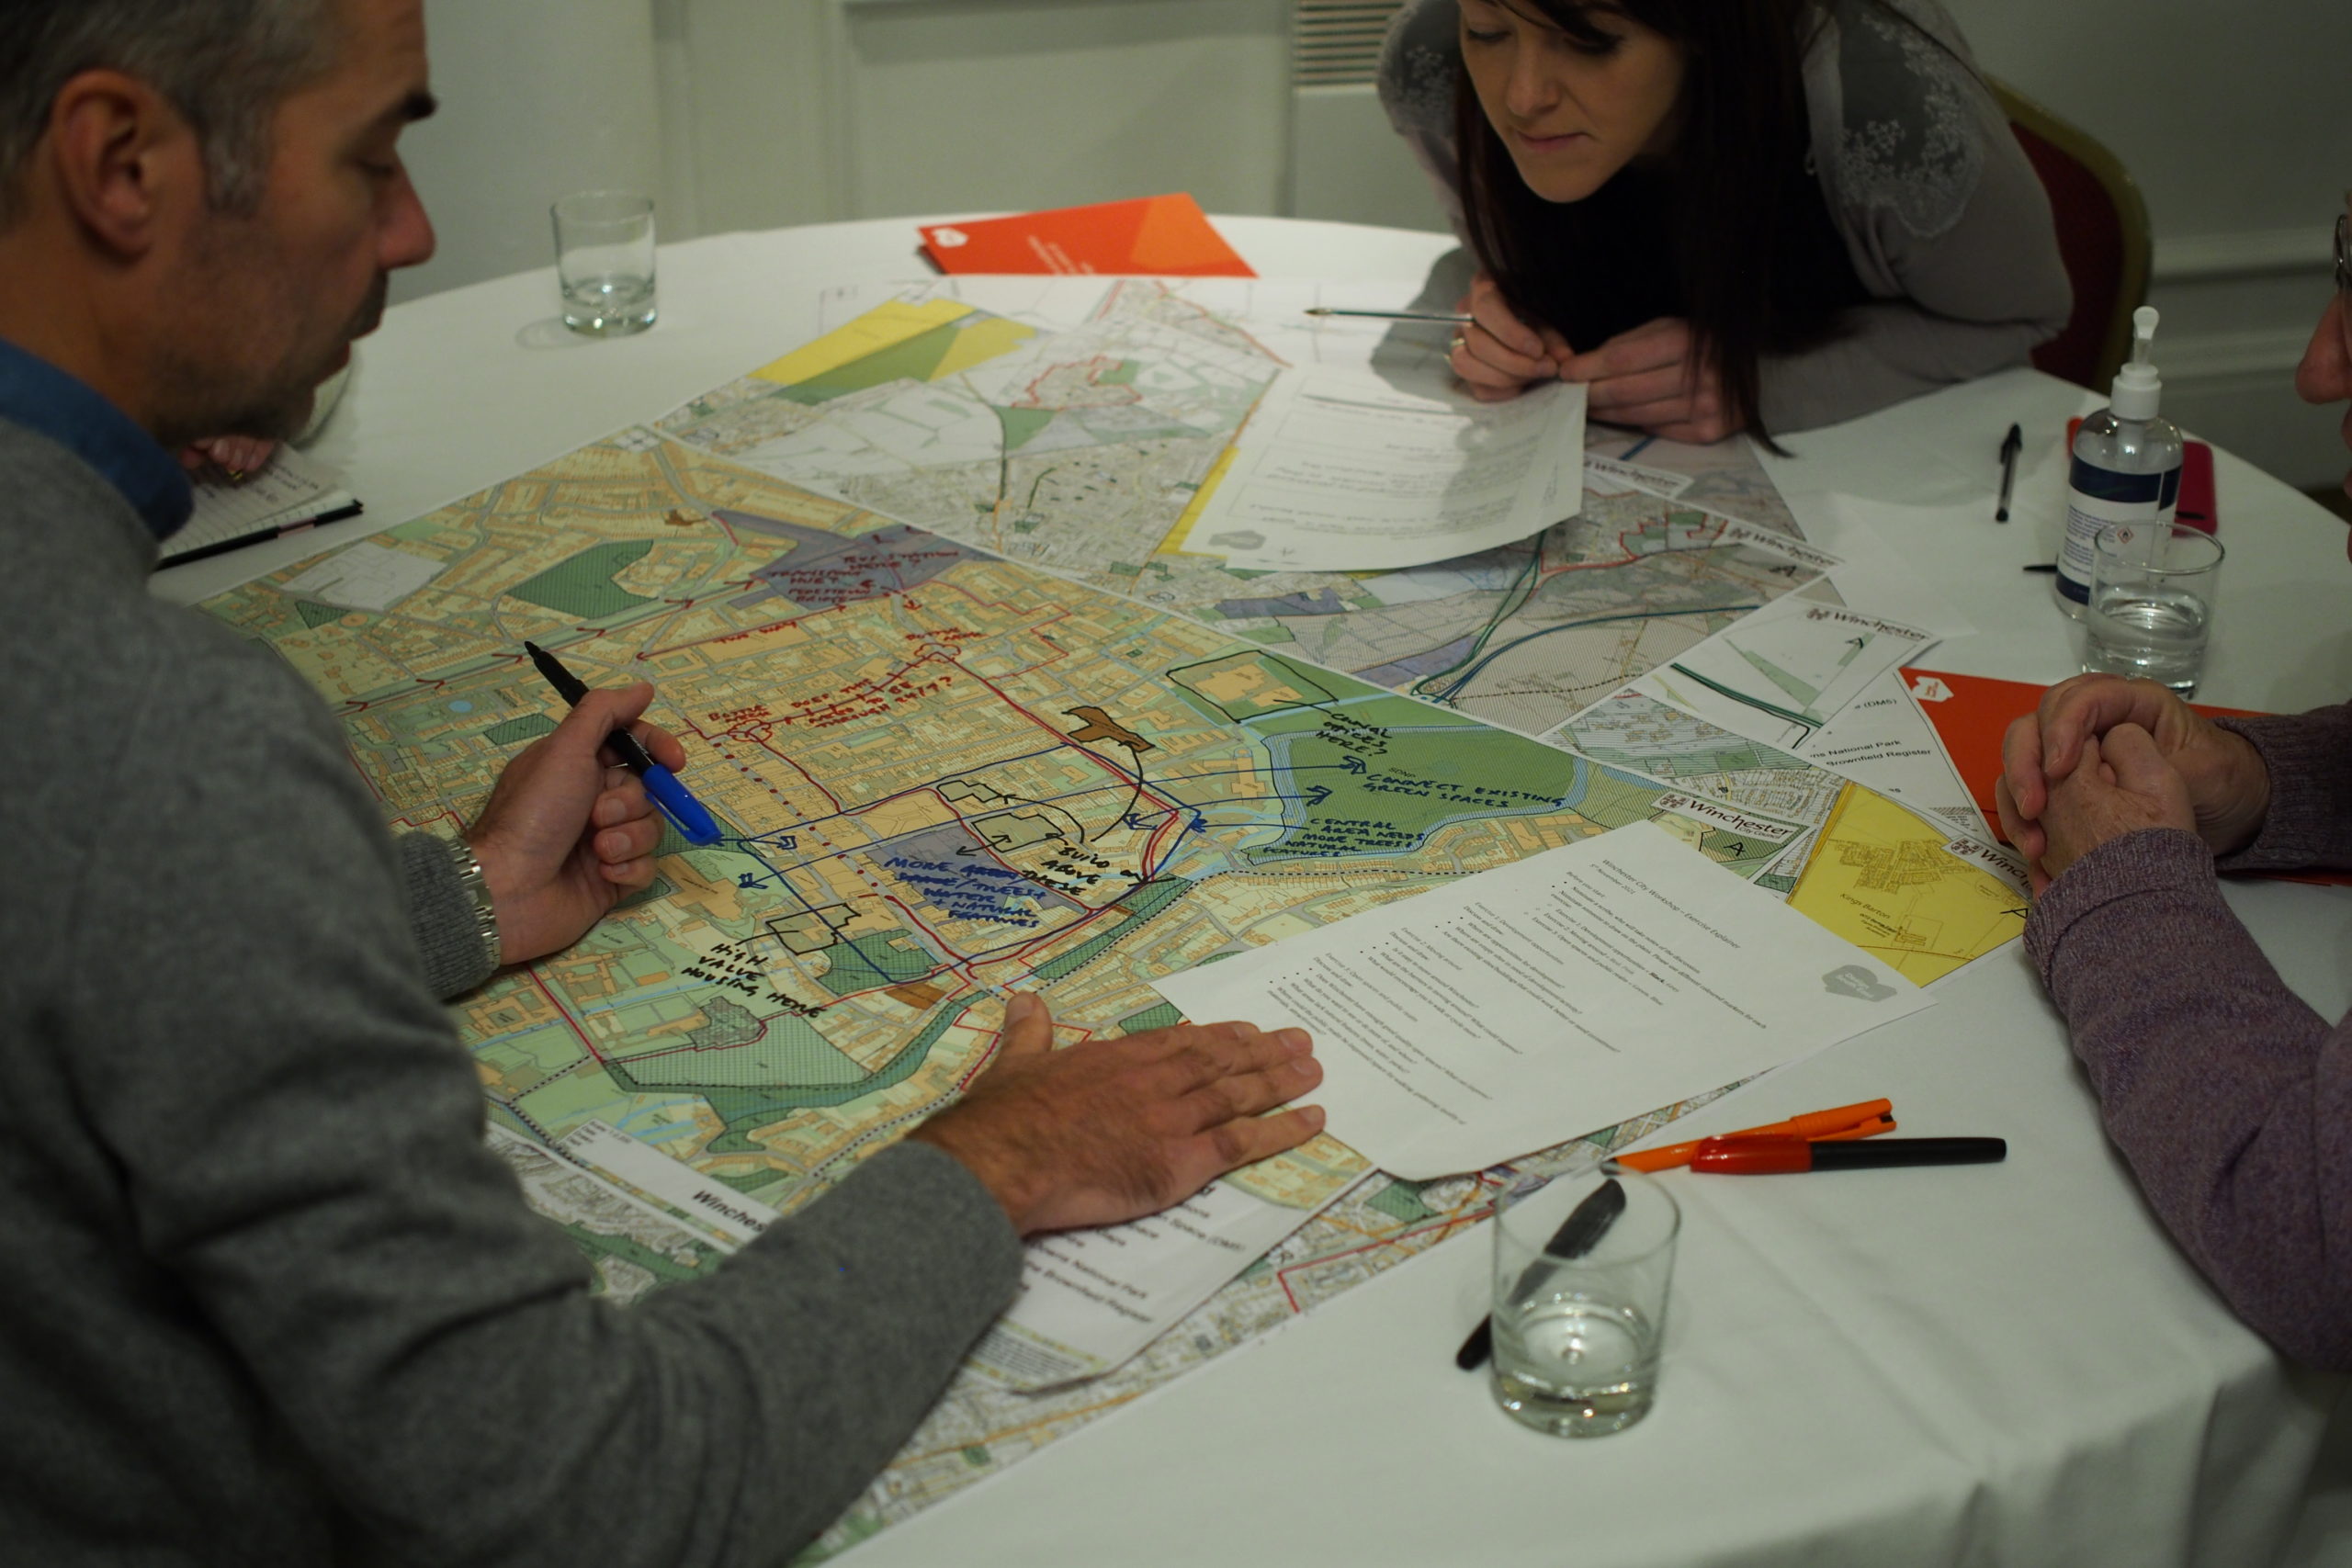 Design South East – Stakeholder workshops for Winchester City Council